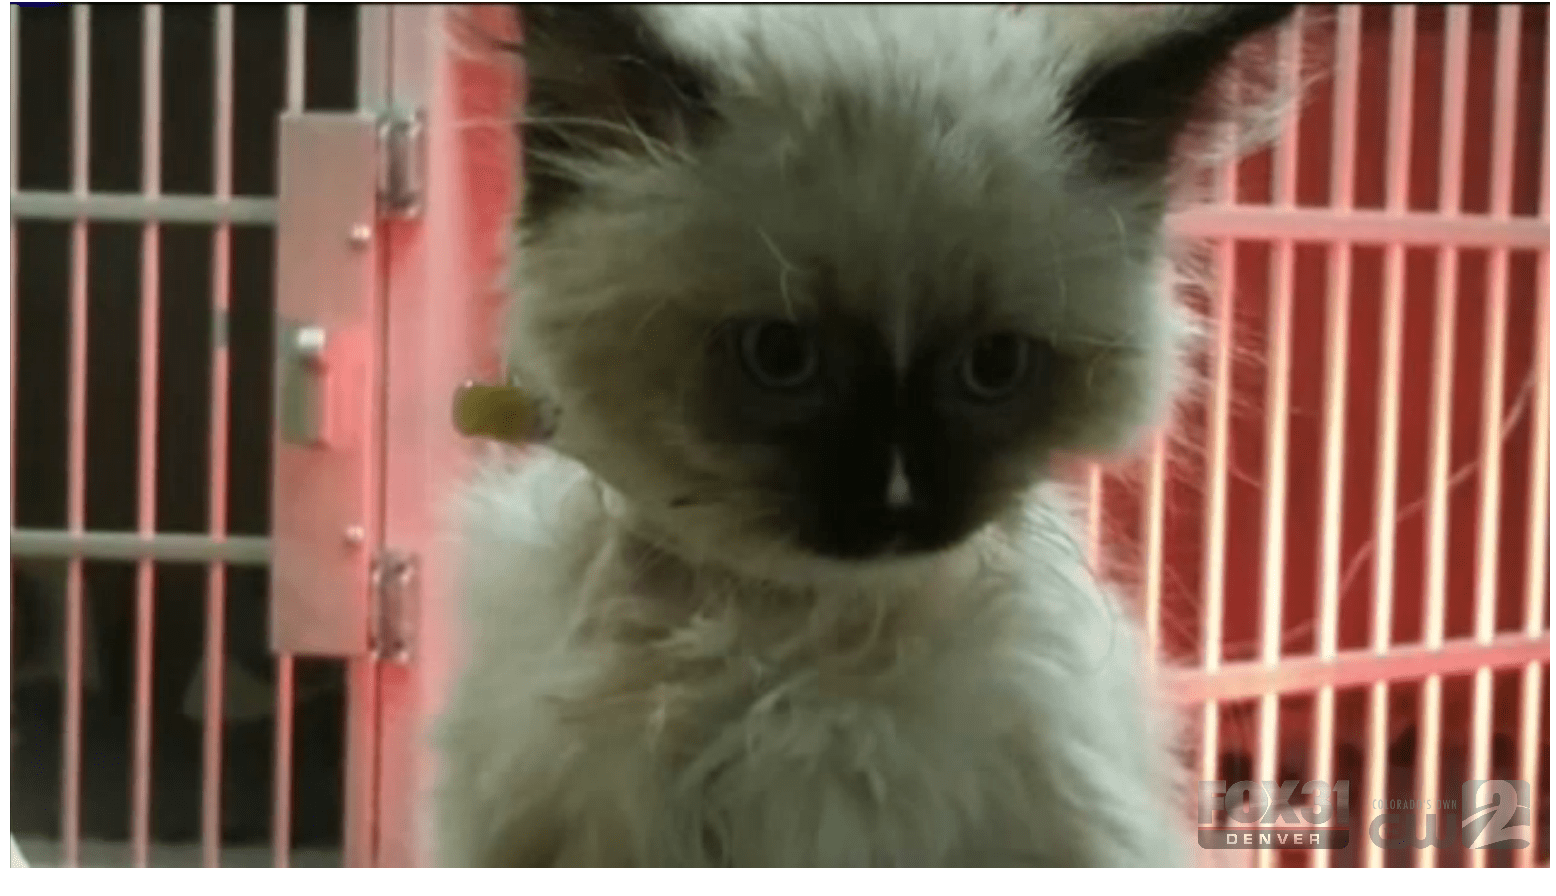 Sick And Dying Kittens Sold On Craigslist | Life With Cats